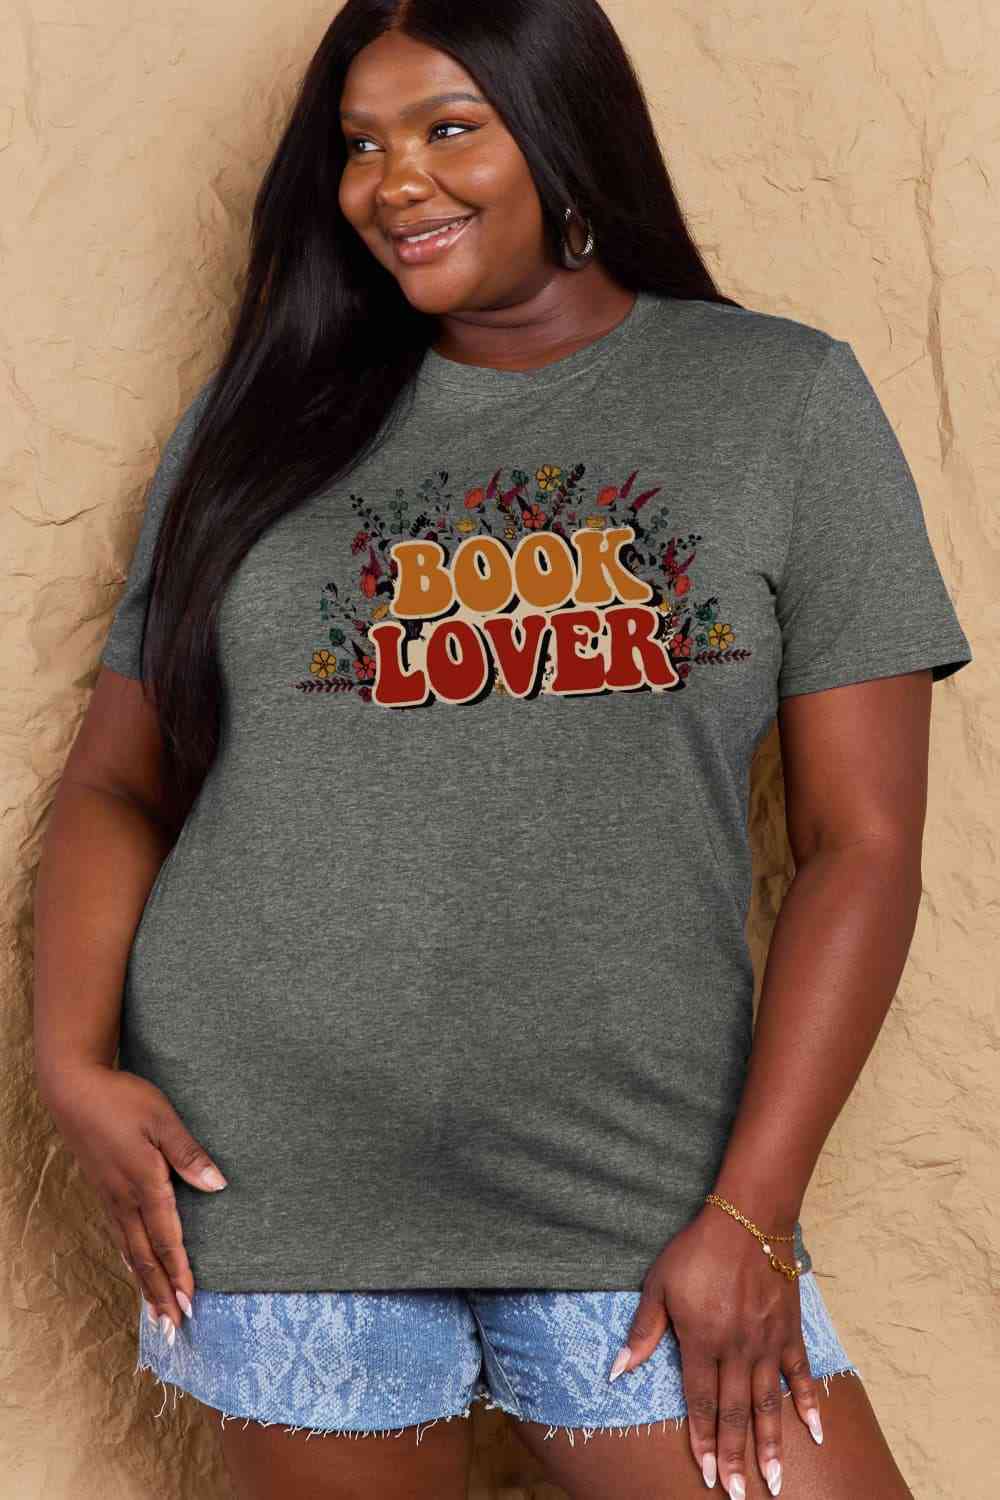 Simply Love Full Size BOOK LOVER Graphic Cotton Tee